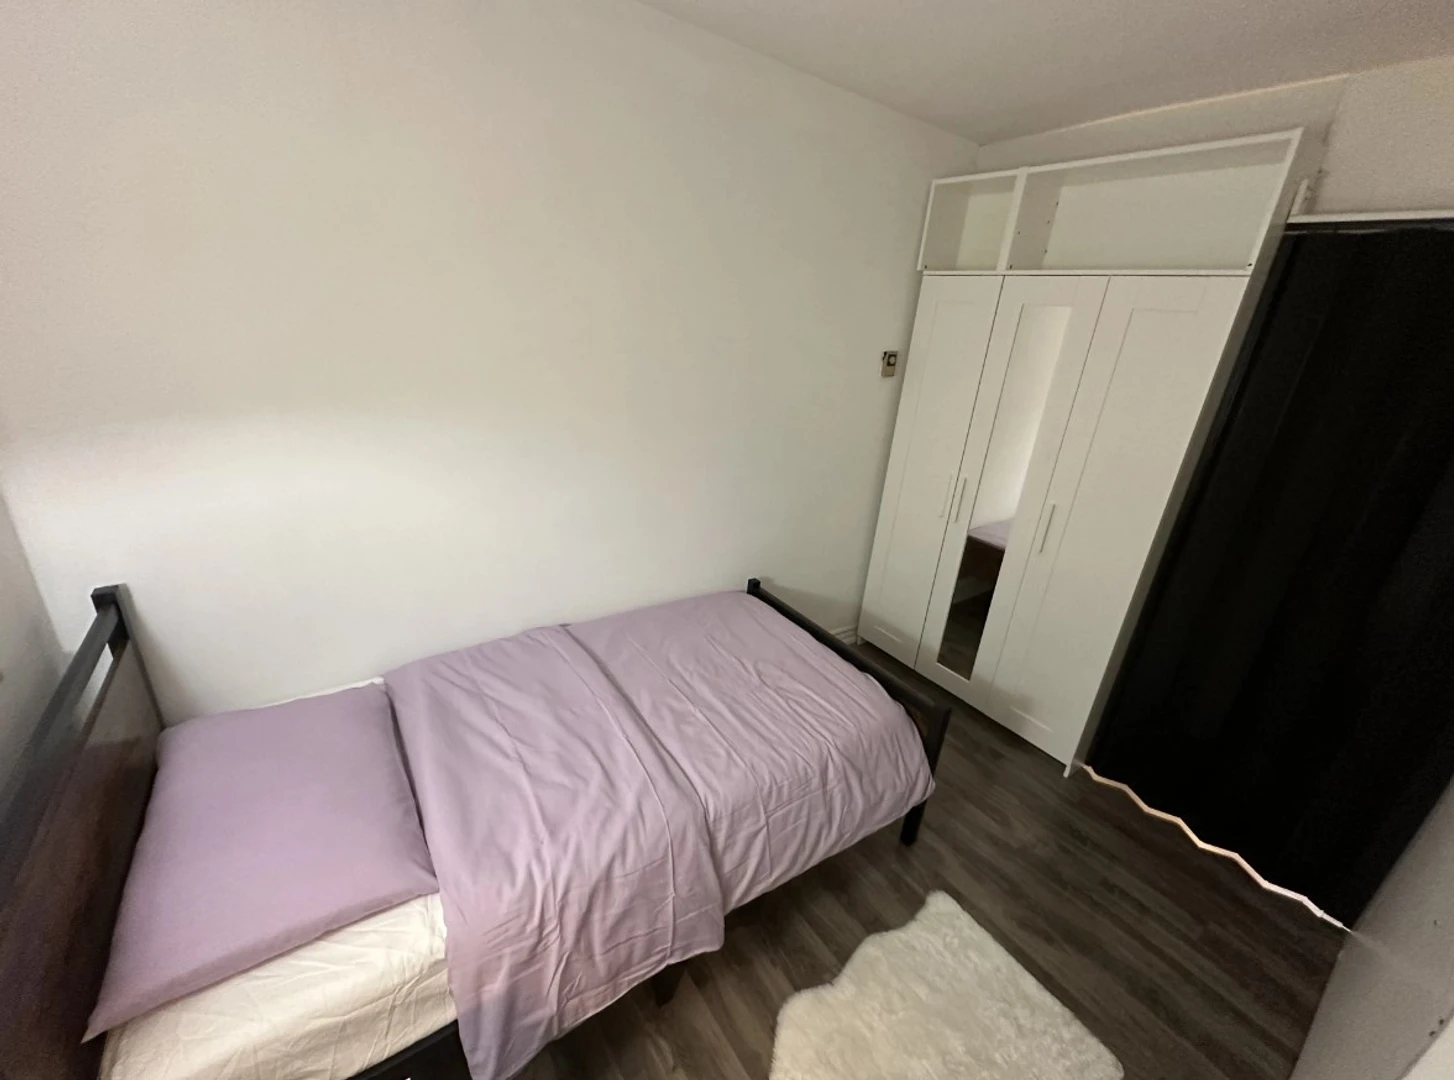 Room for rent in a shared flat in Toronto